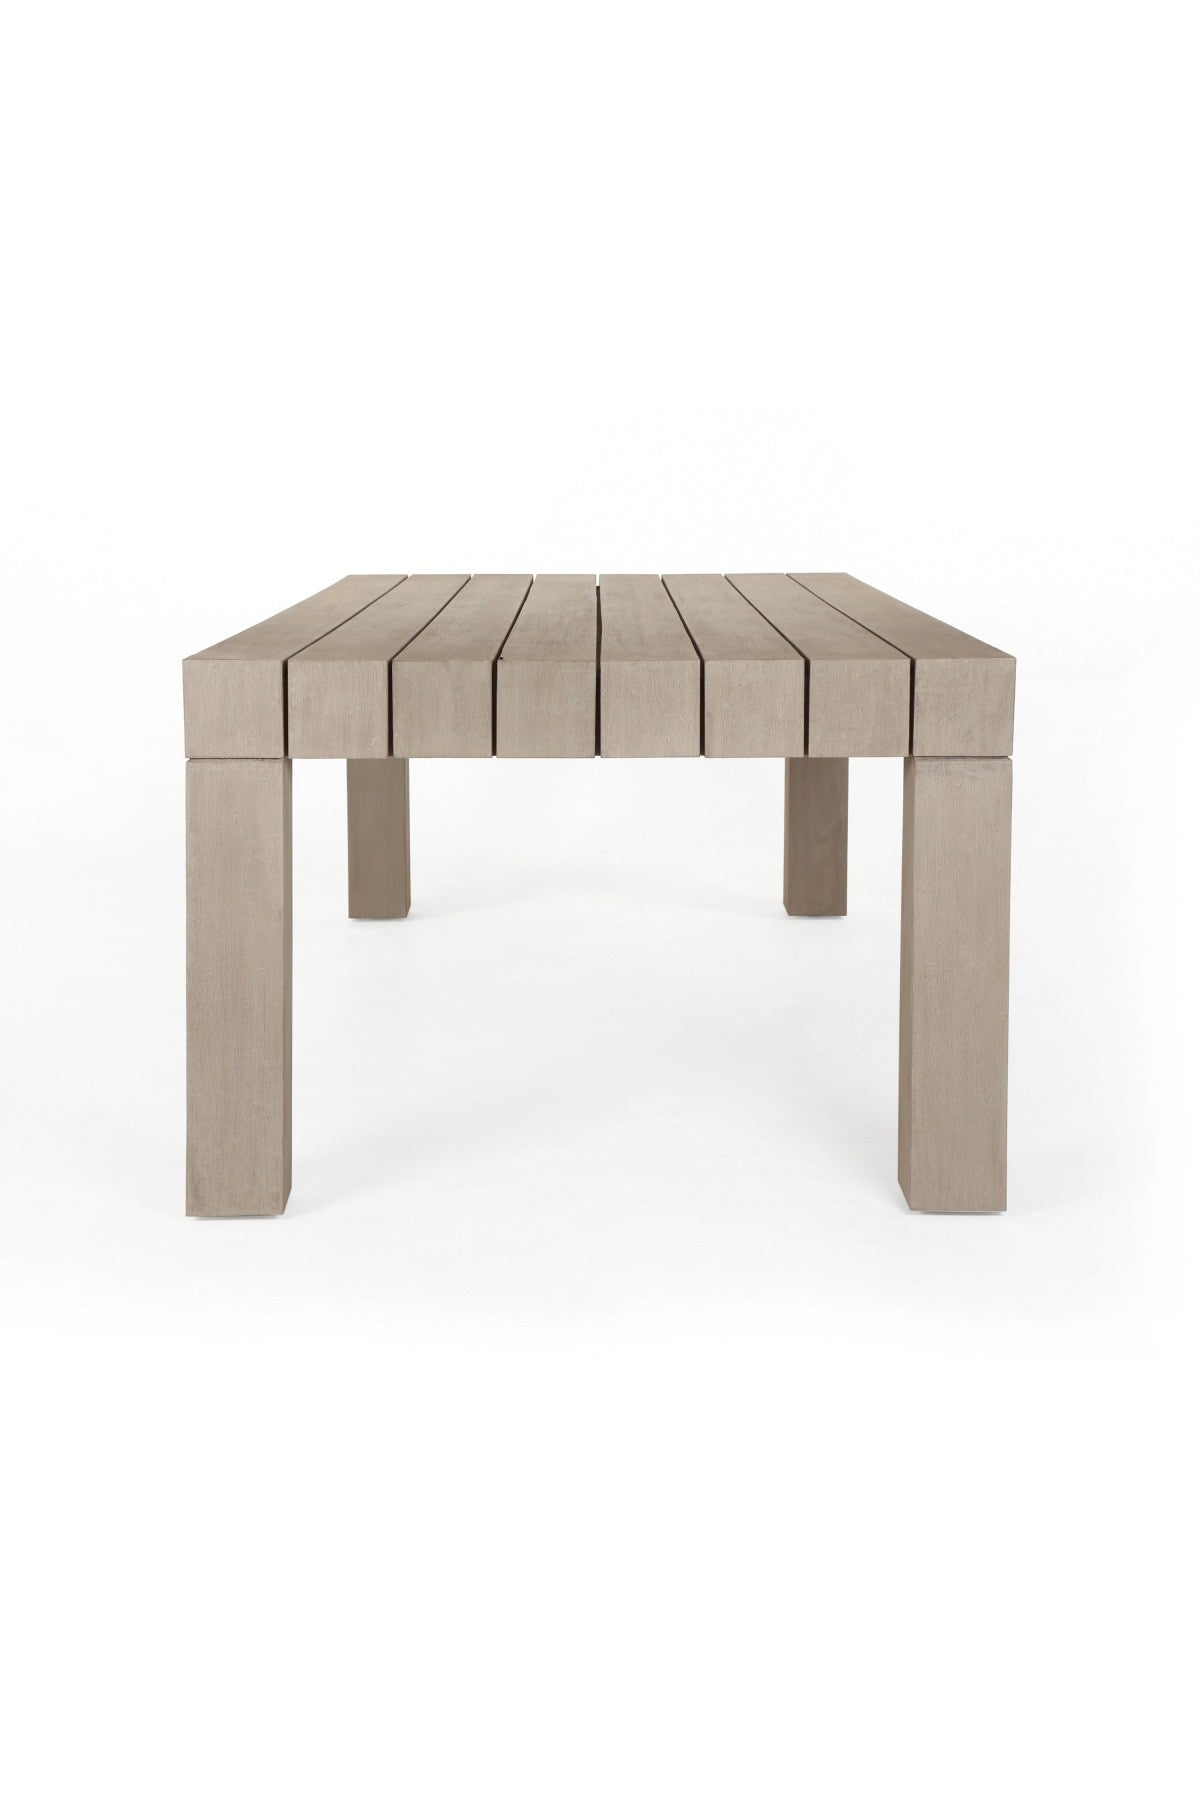 Carina Outdoor Dining Table - Washed Brown